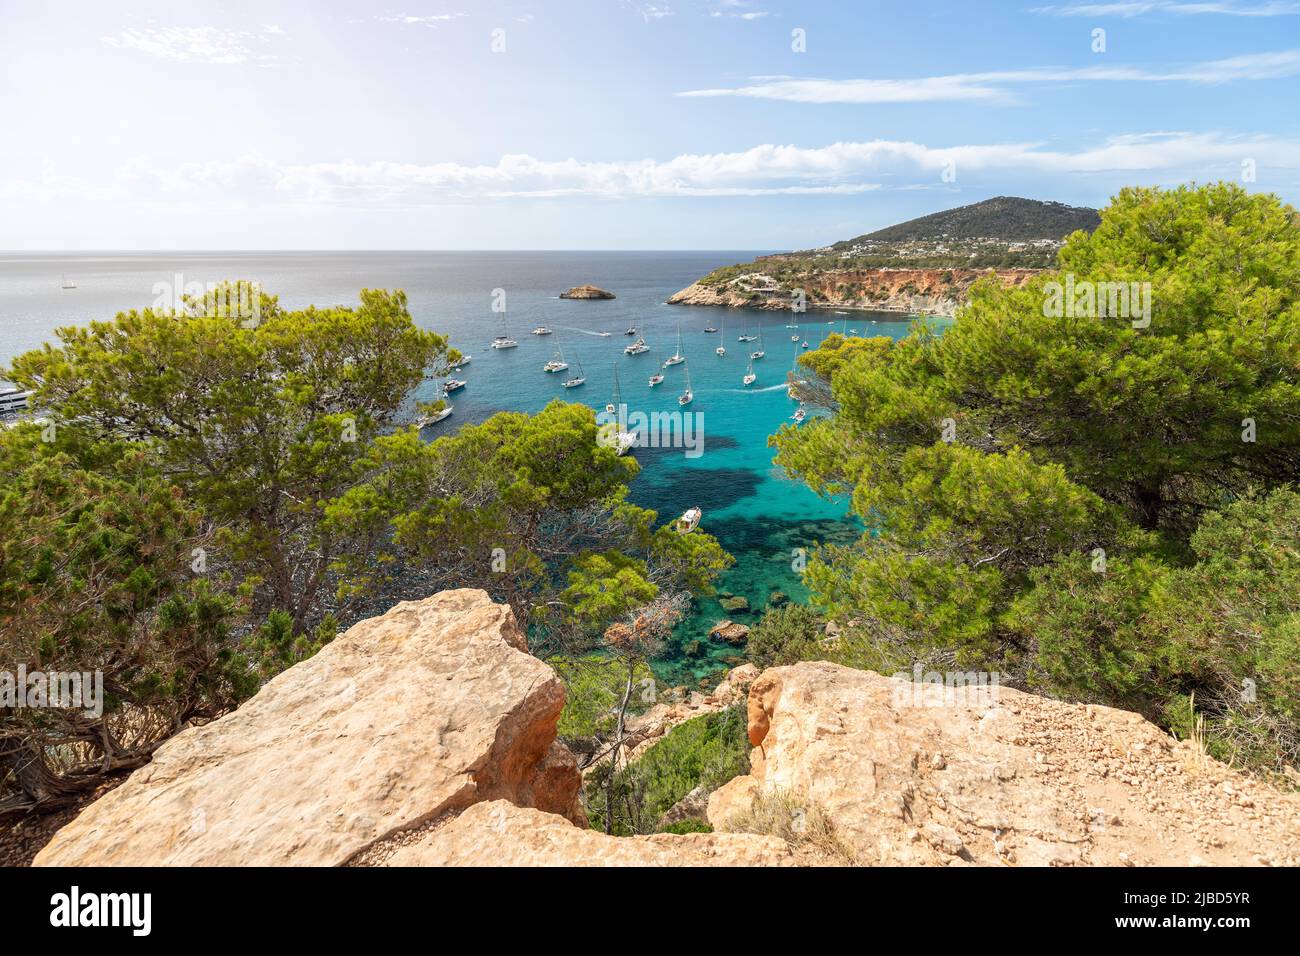 Limestones cliffs, pine and deciduous trees and clear shallow water of bay Cola d'Hort with numerous yachts. Ibiza, Balearic Islands, Spain Stock Photo